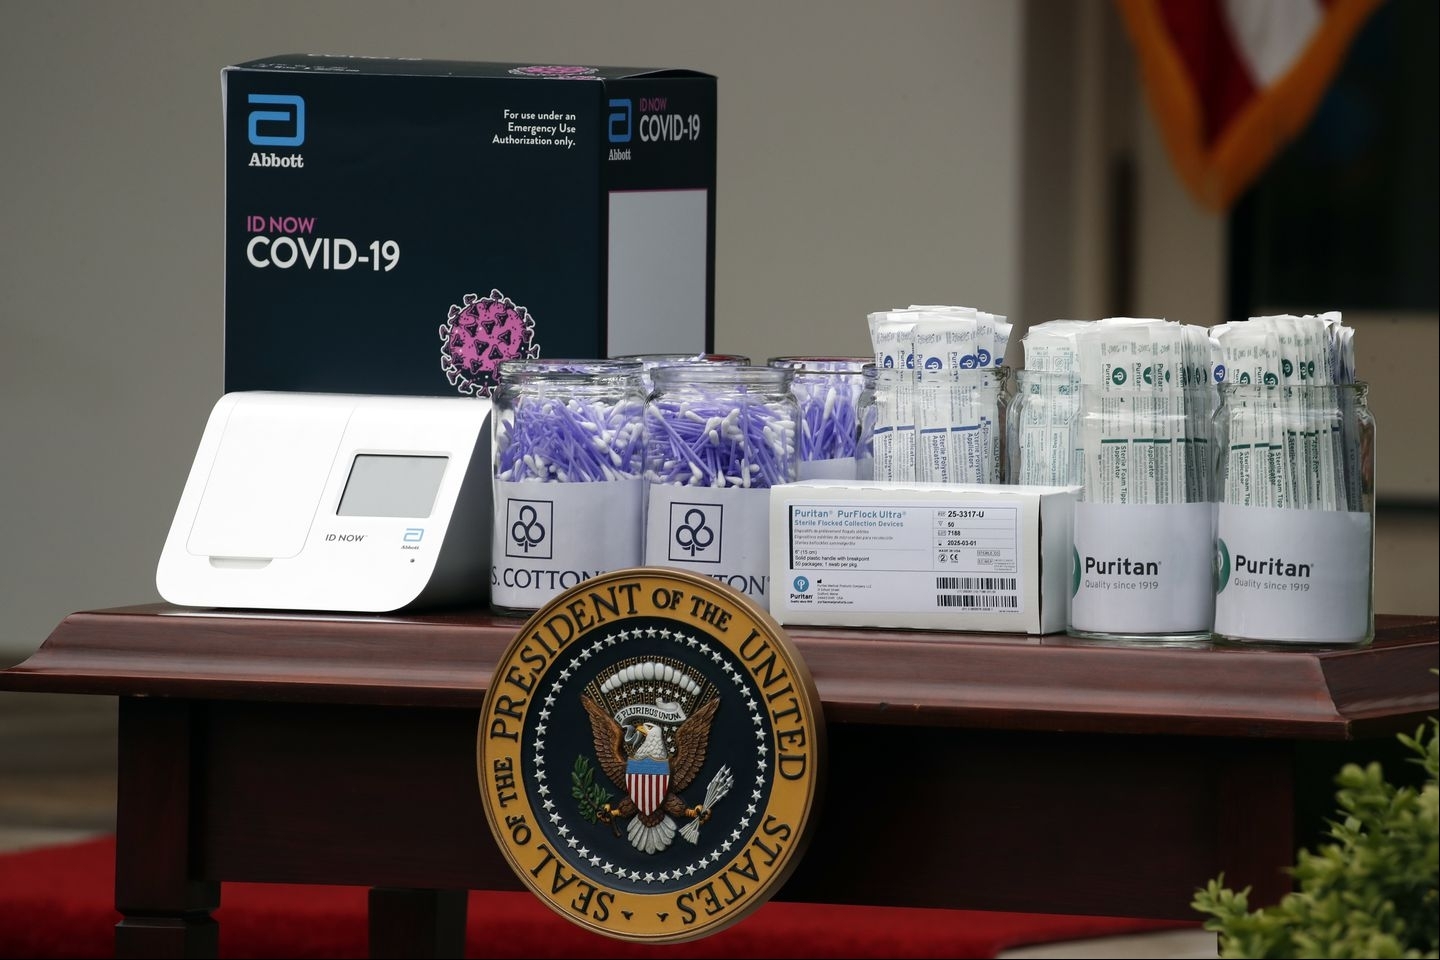 World news today: Rapid coronavirus test used at White House misses many COVID-19 cases